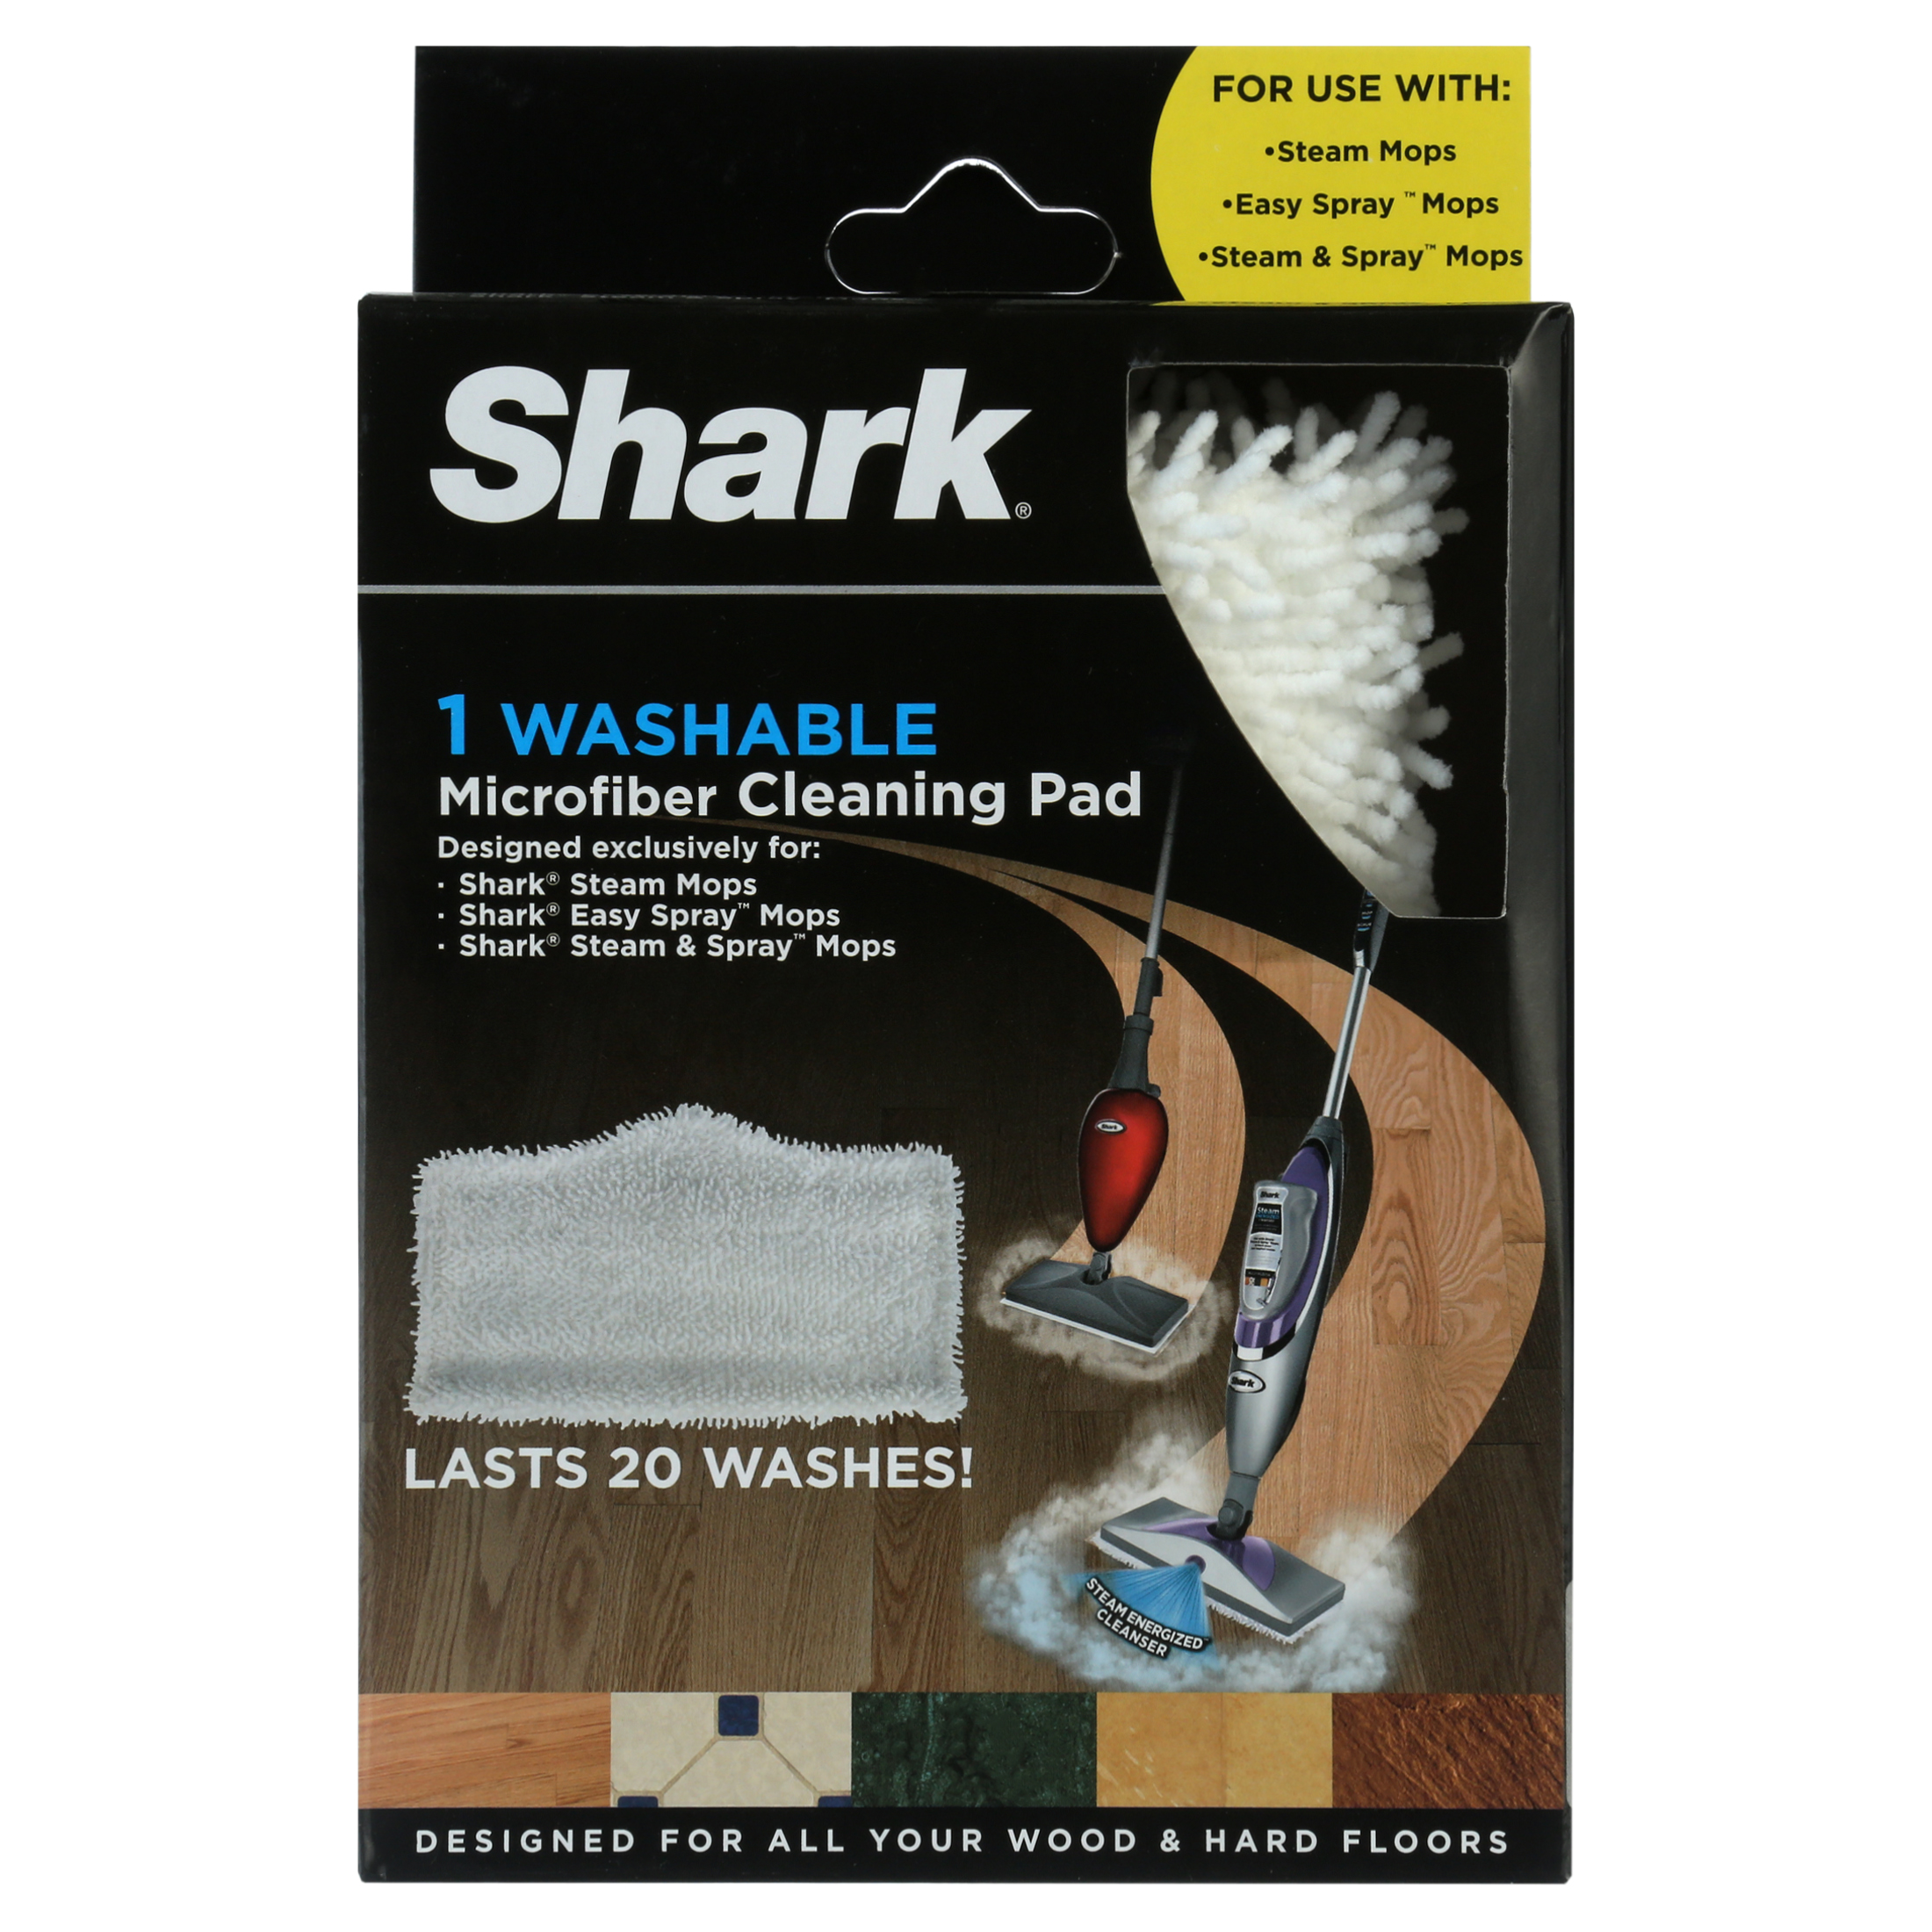 Shark Washable Microfiber Cleaning Pad, 1 count, compatible with Shark Steam Mop S1000WM - image 3 of 7